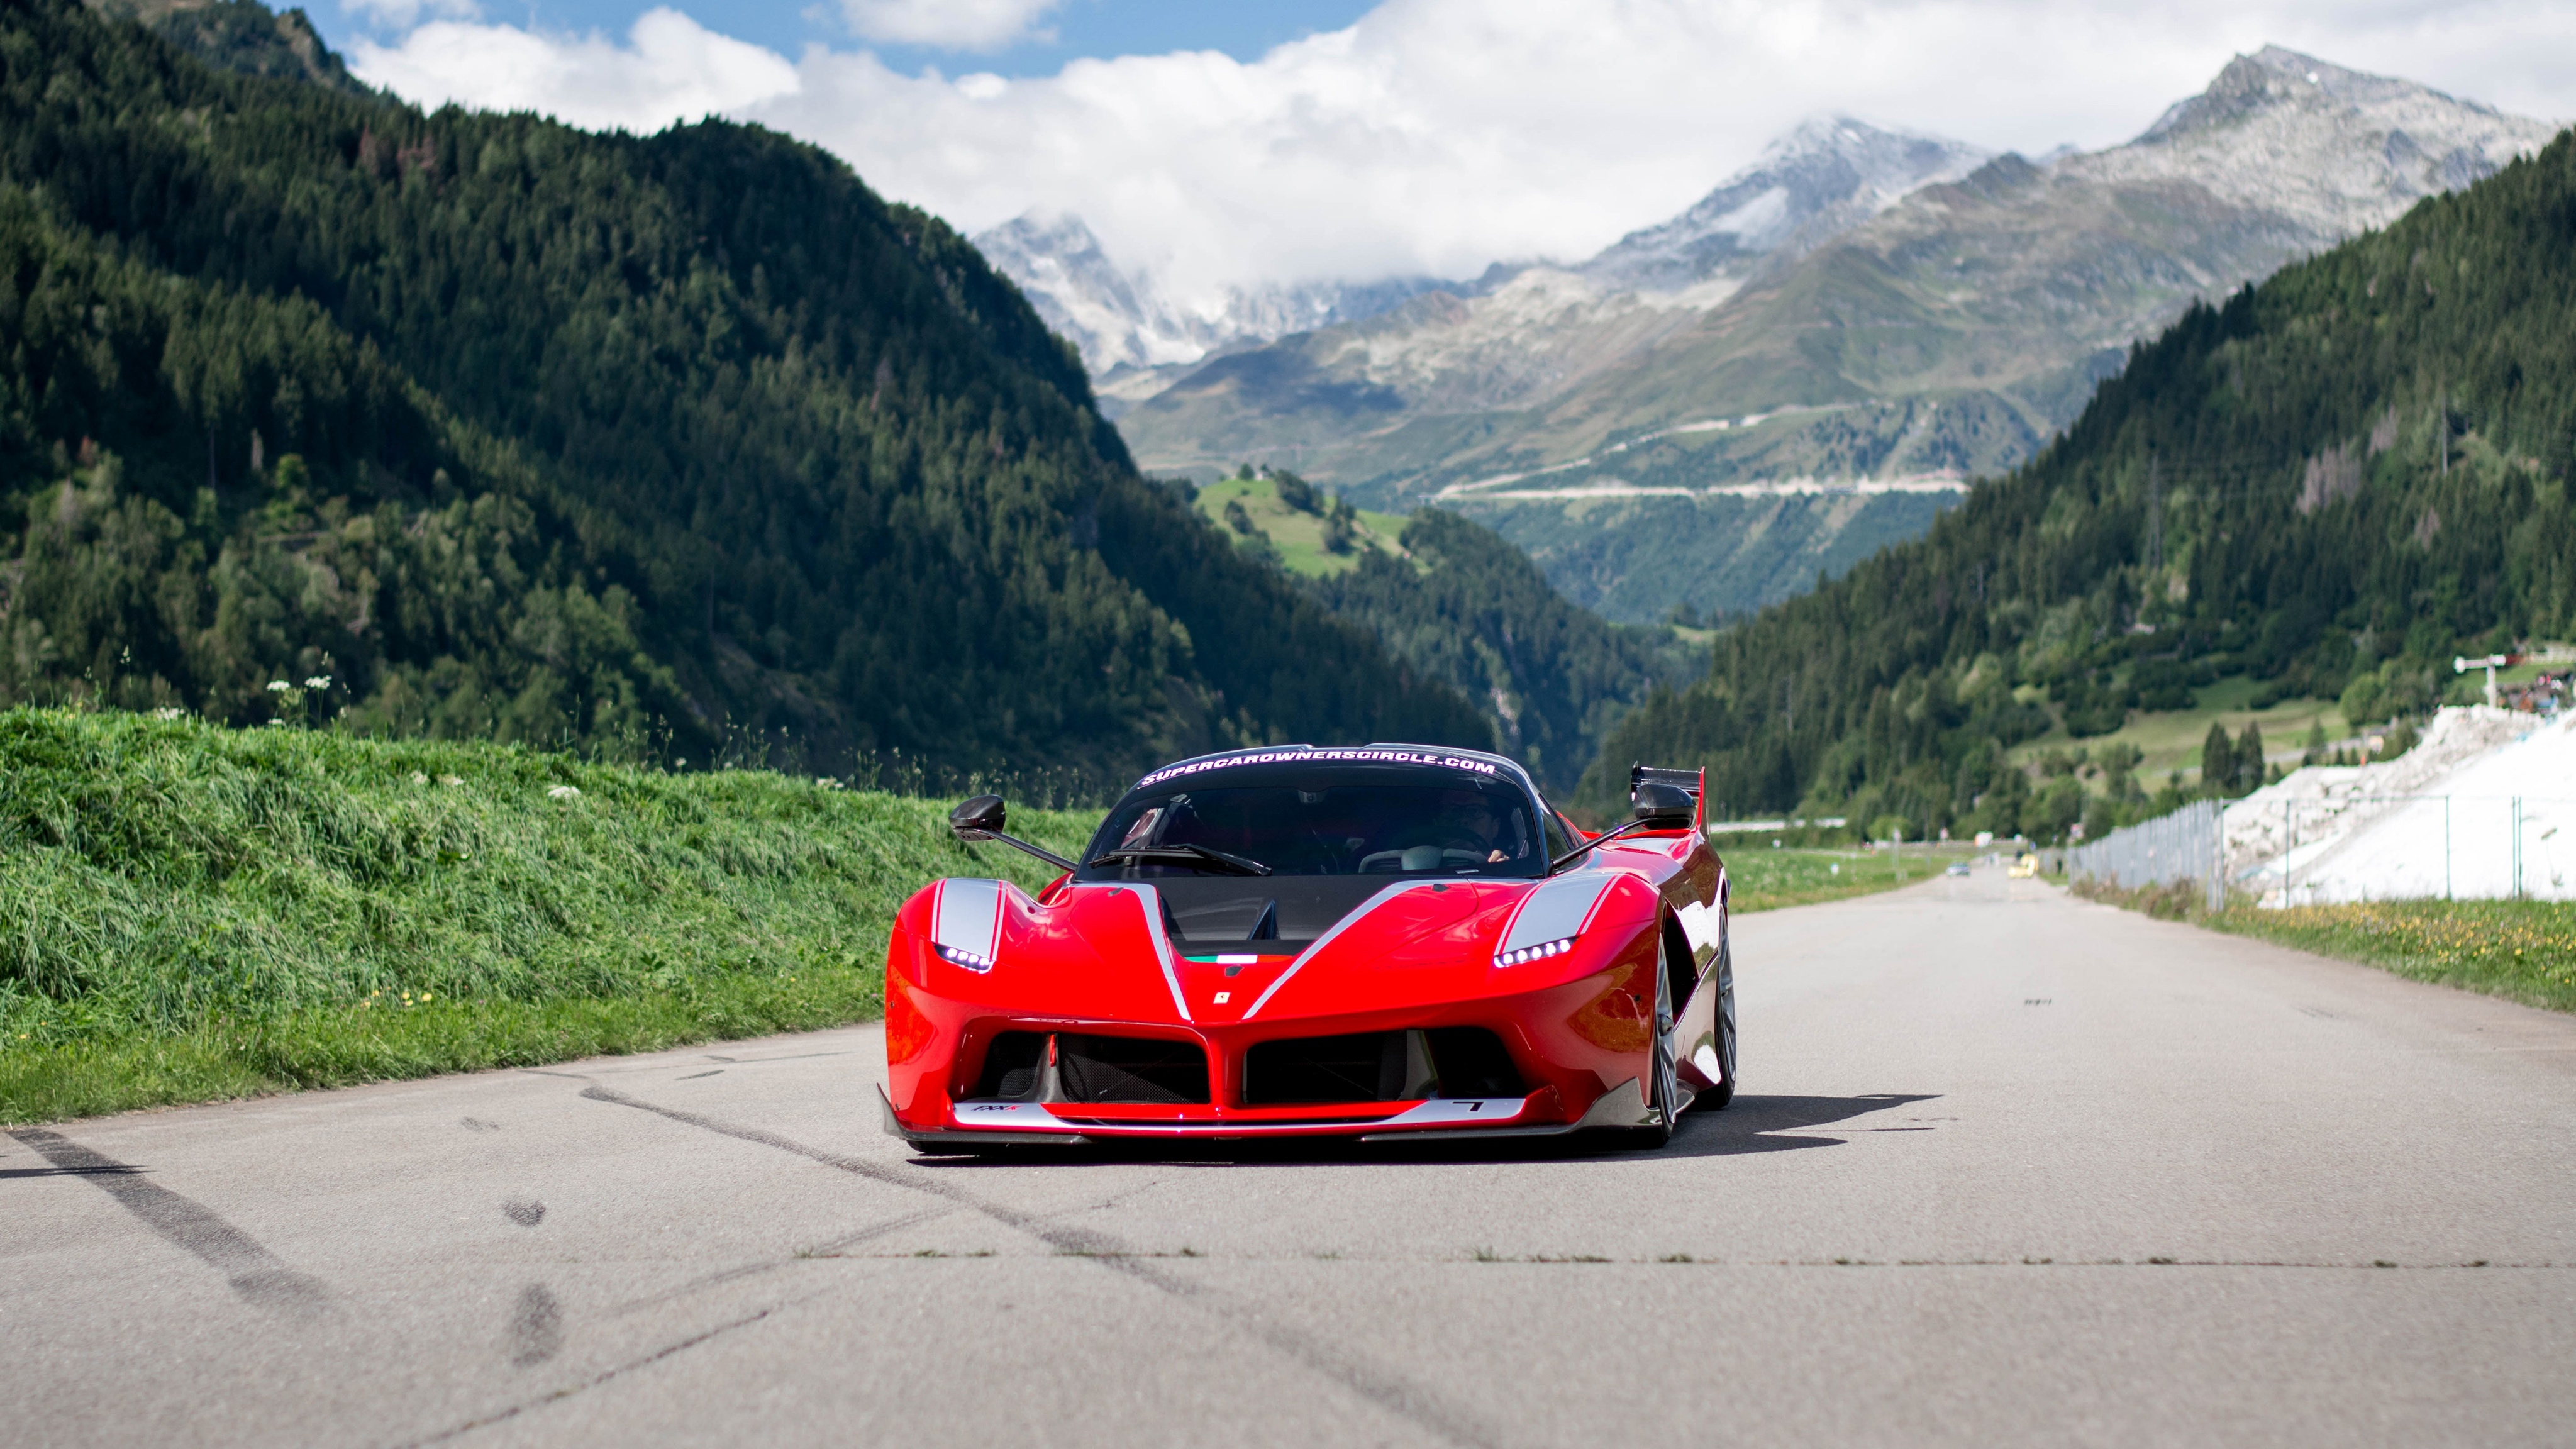 Wallpapers ferrari fxx red front view on the desktop